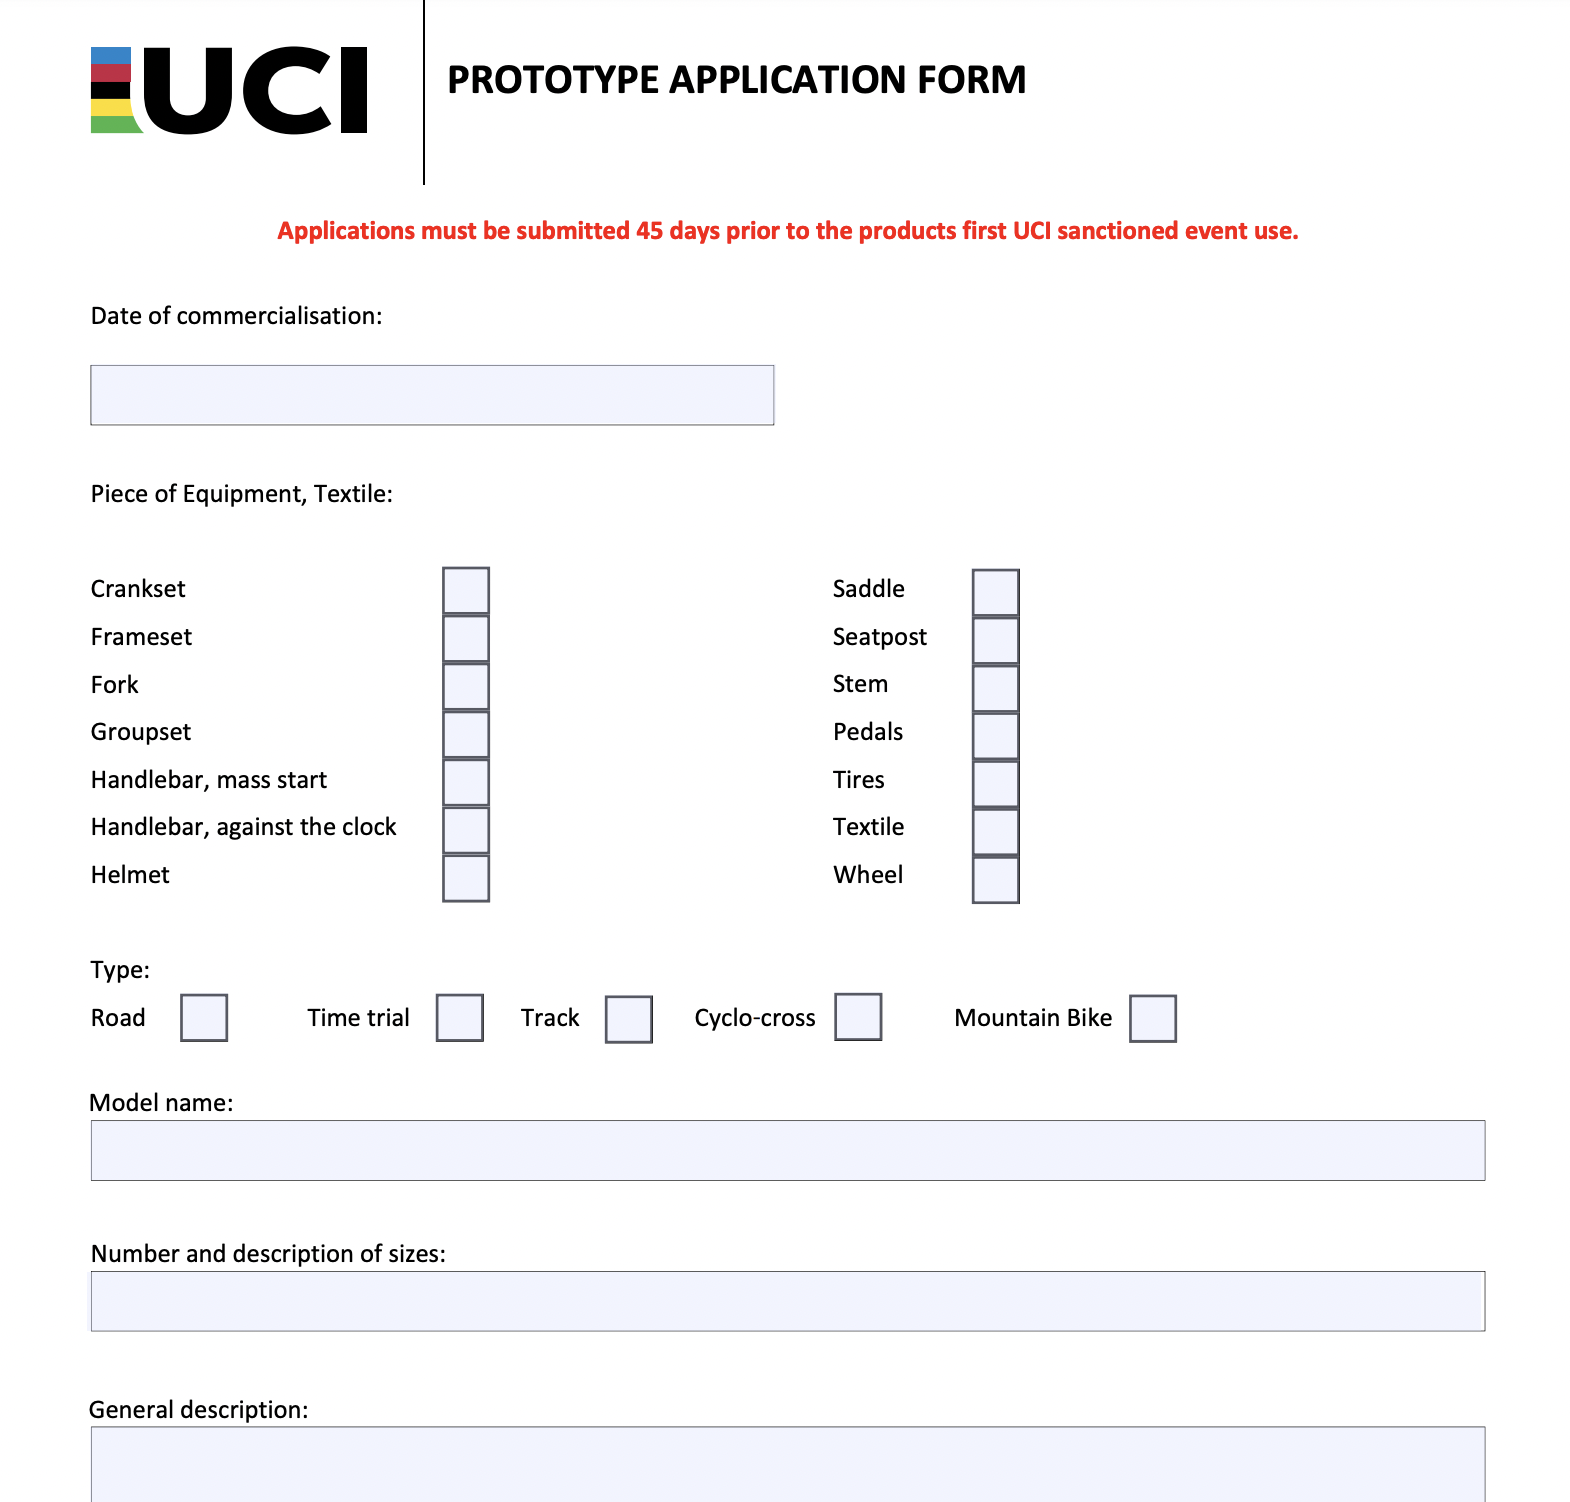 The image shows a screenshot of the UCI's Prototype Application Form with the requirement for applications to be submitted 45 days prior to use in UCI events highlighted in red bold text. Tick box options are provided for many component and textile types, with pedals among the list.